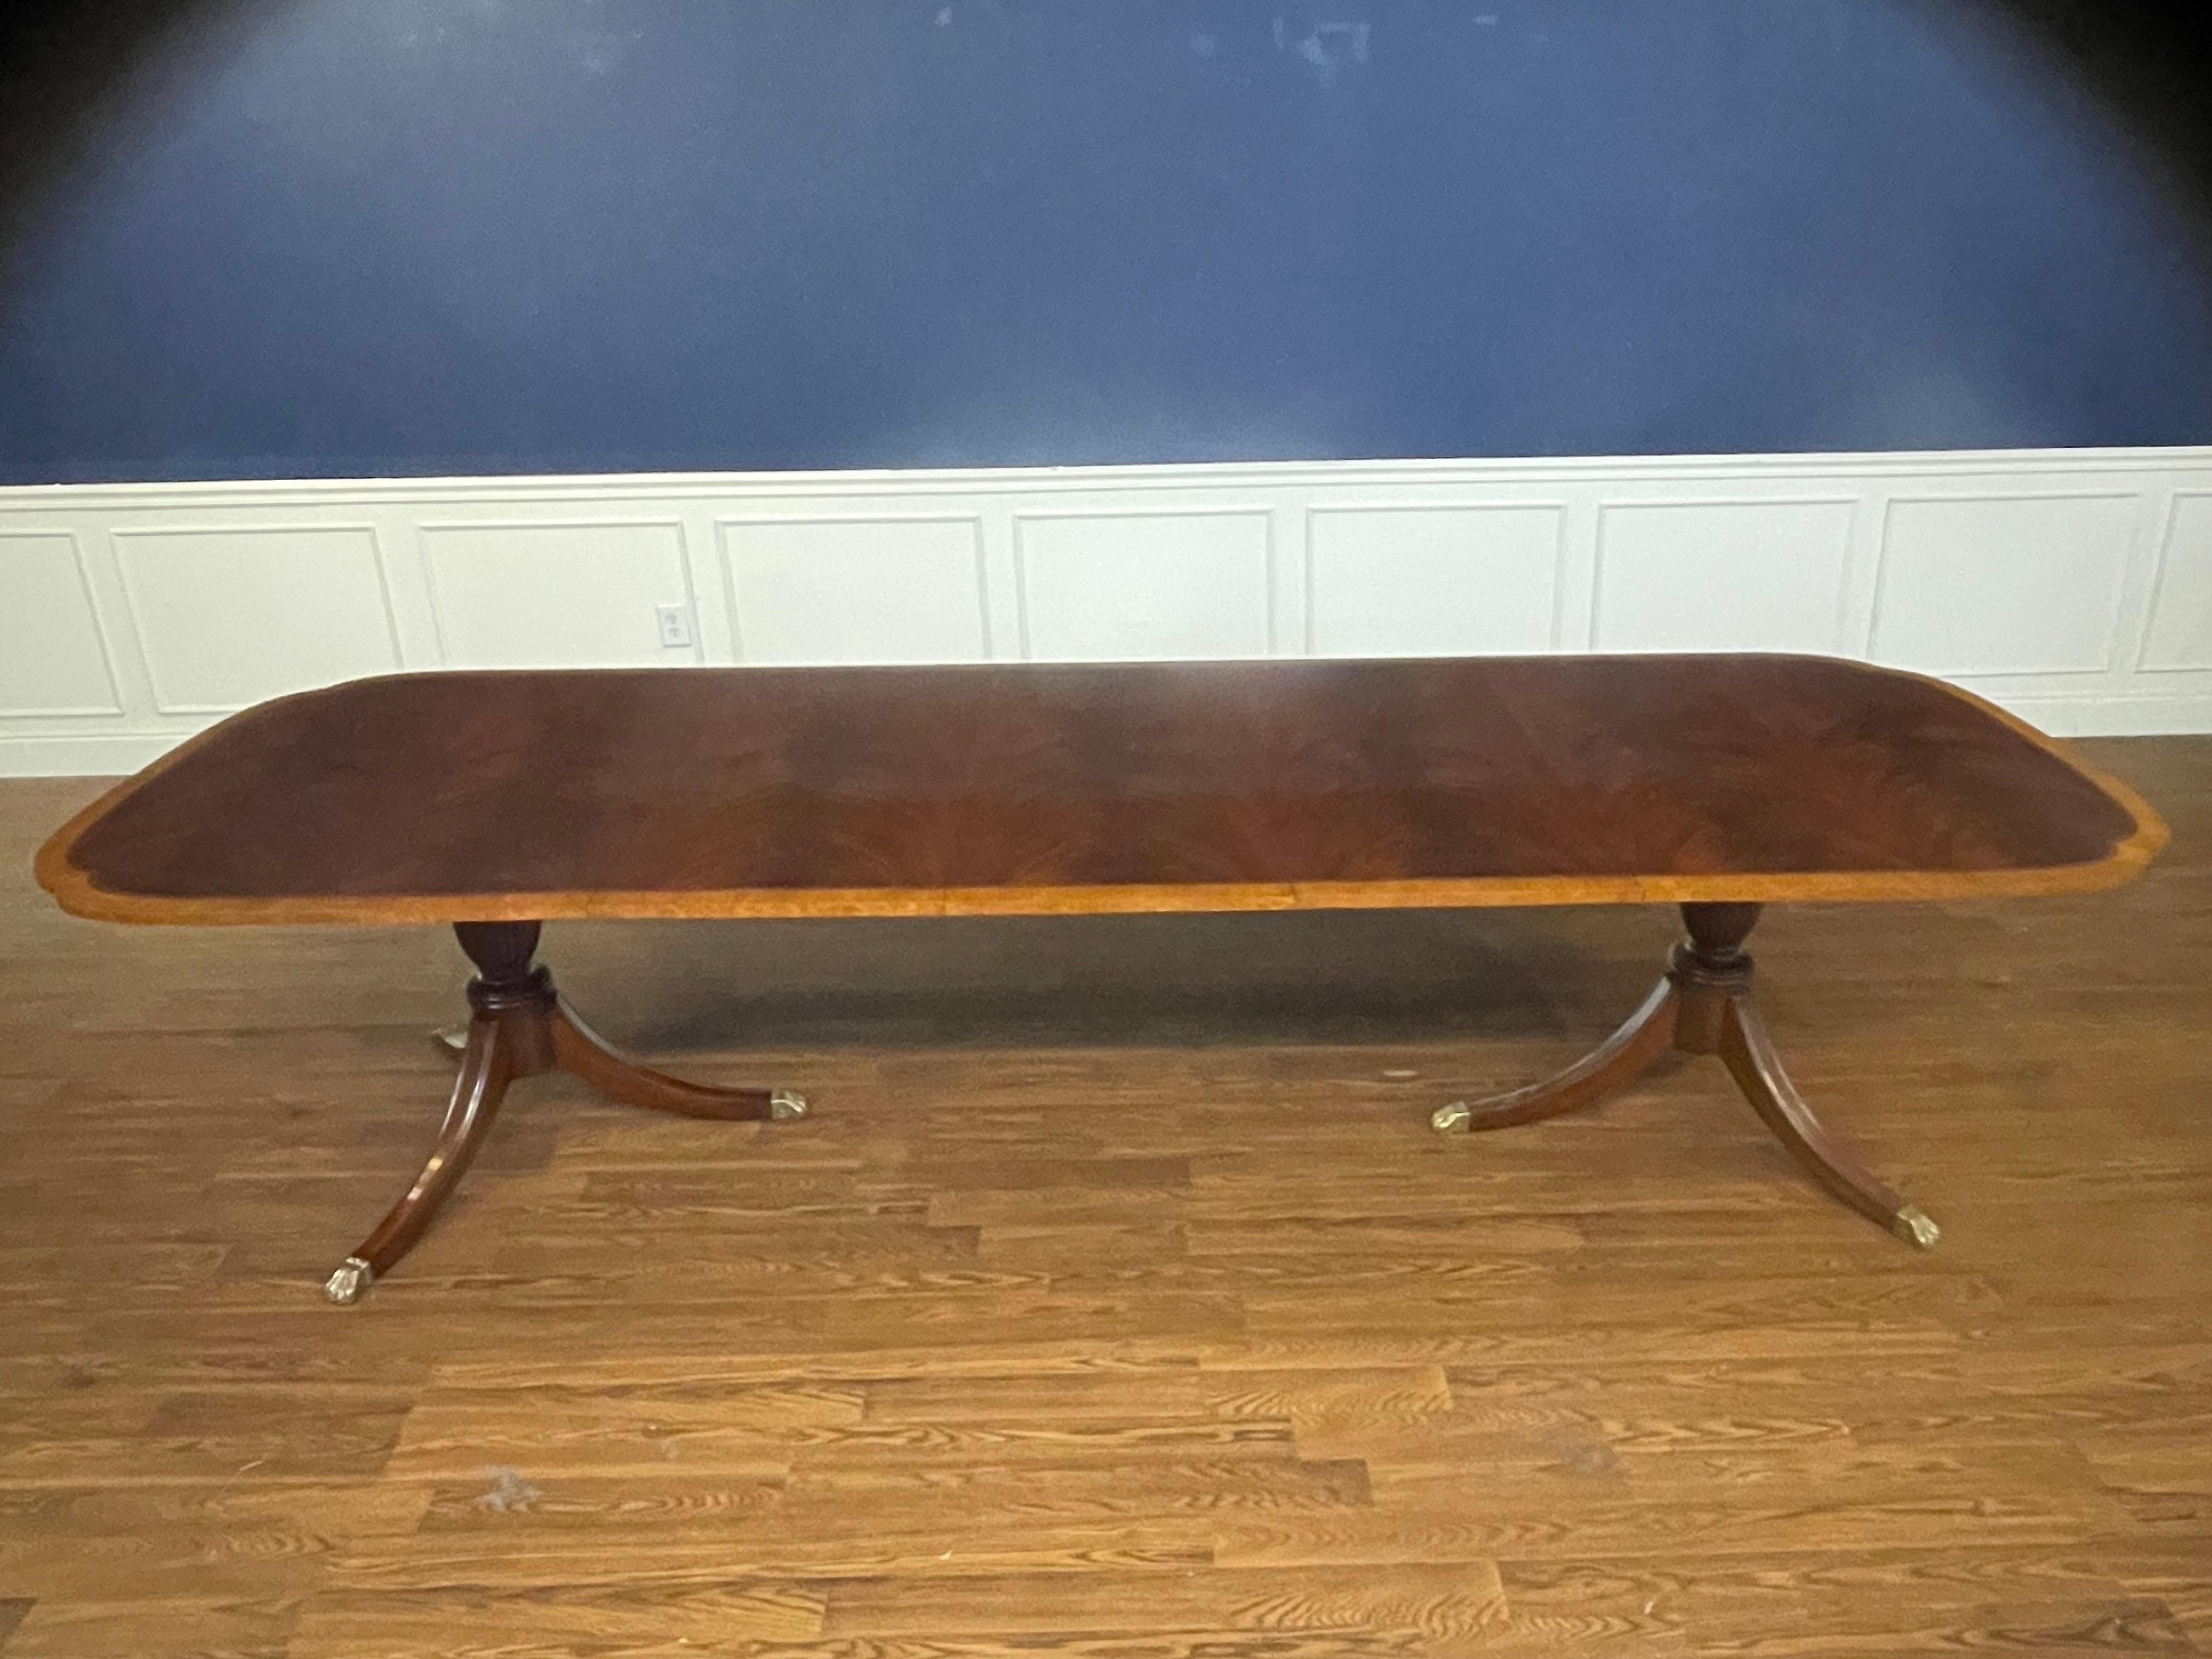 Contemporary Mahogany Scallop Cornered Dining Table by Leighton Hall - Showroom Sample